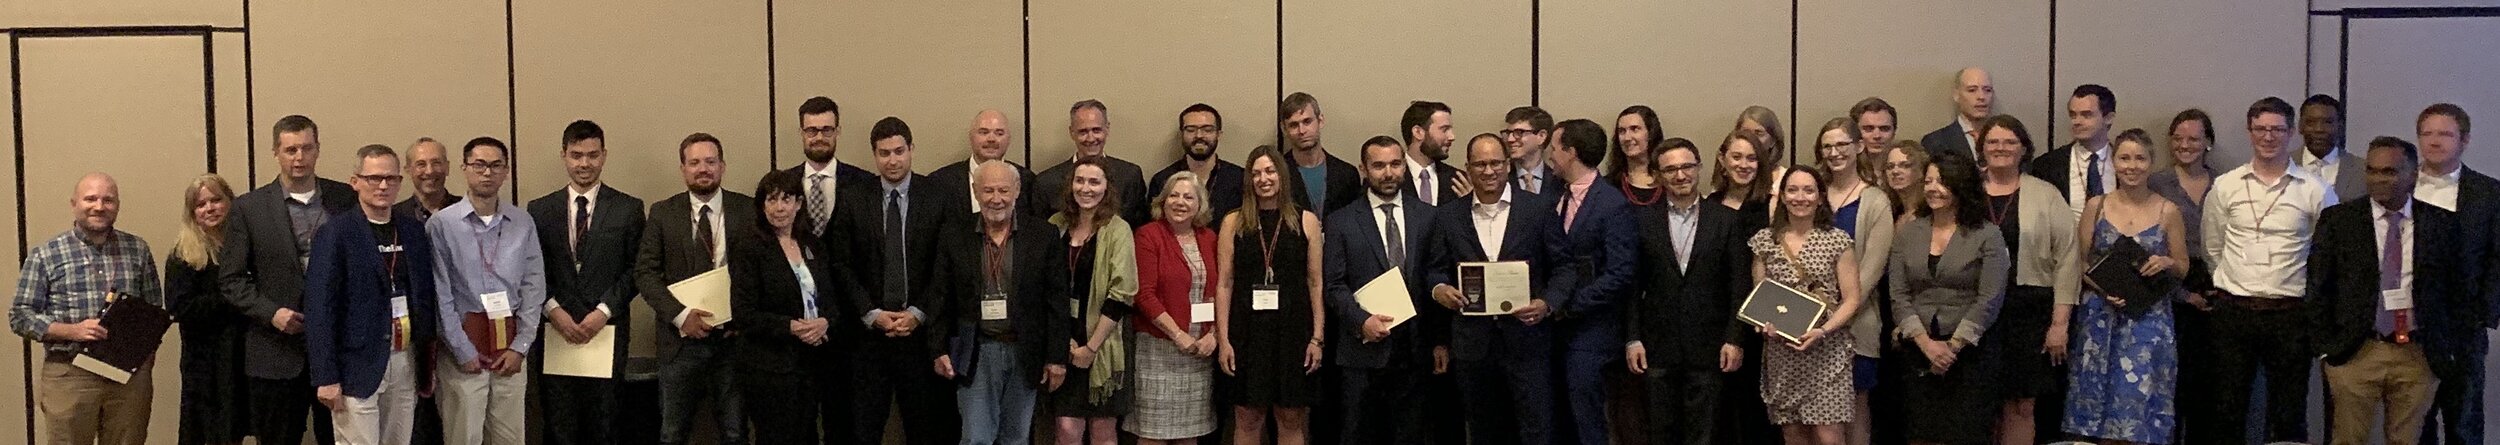 Naree 2019 journalism competition winners received their awards in Austin in June.JPG